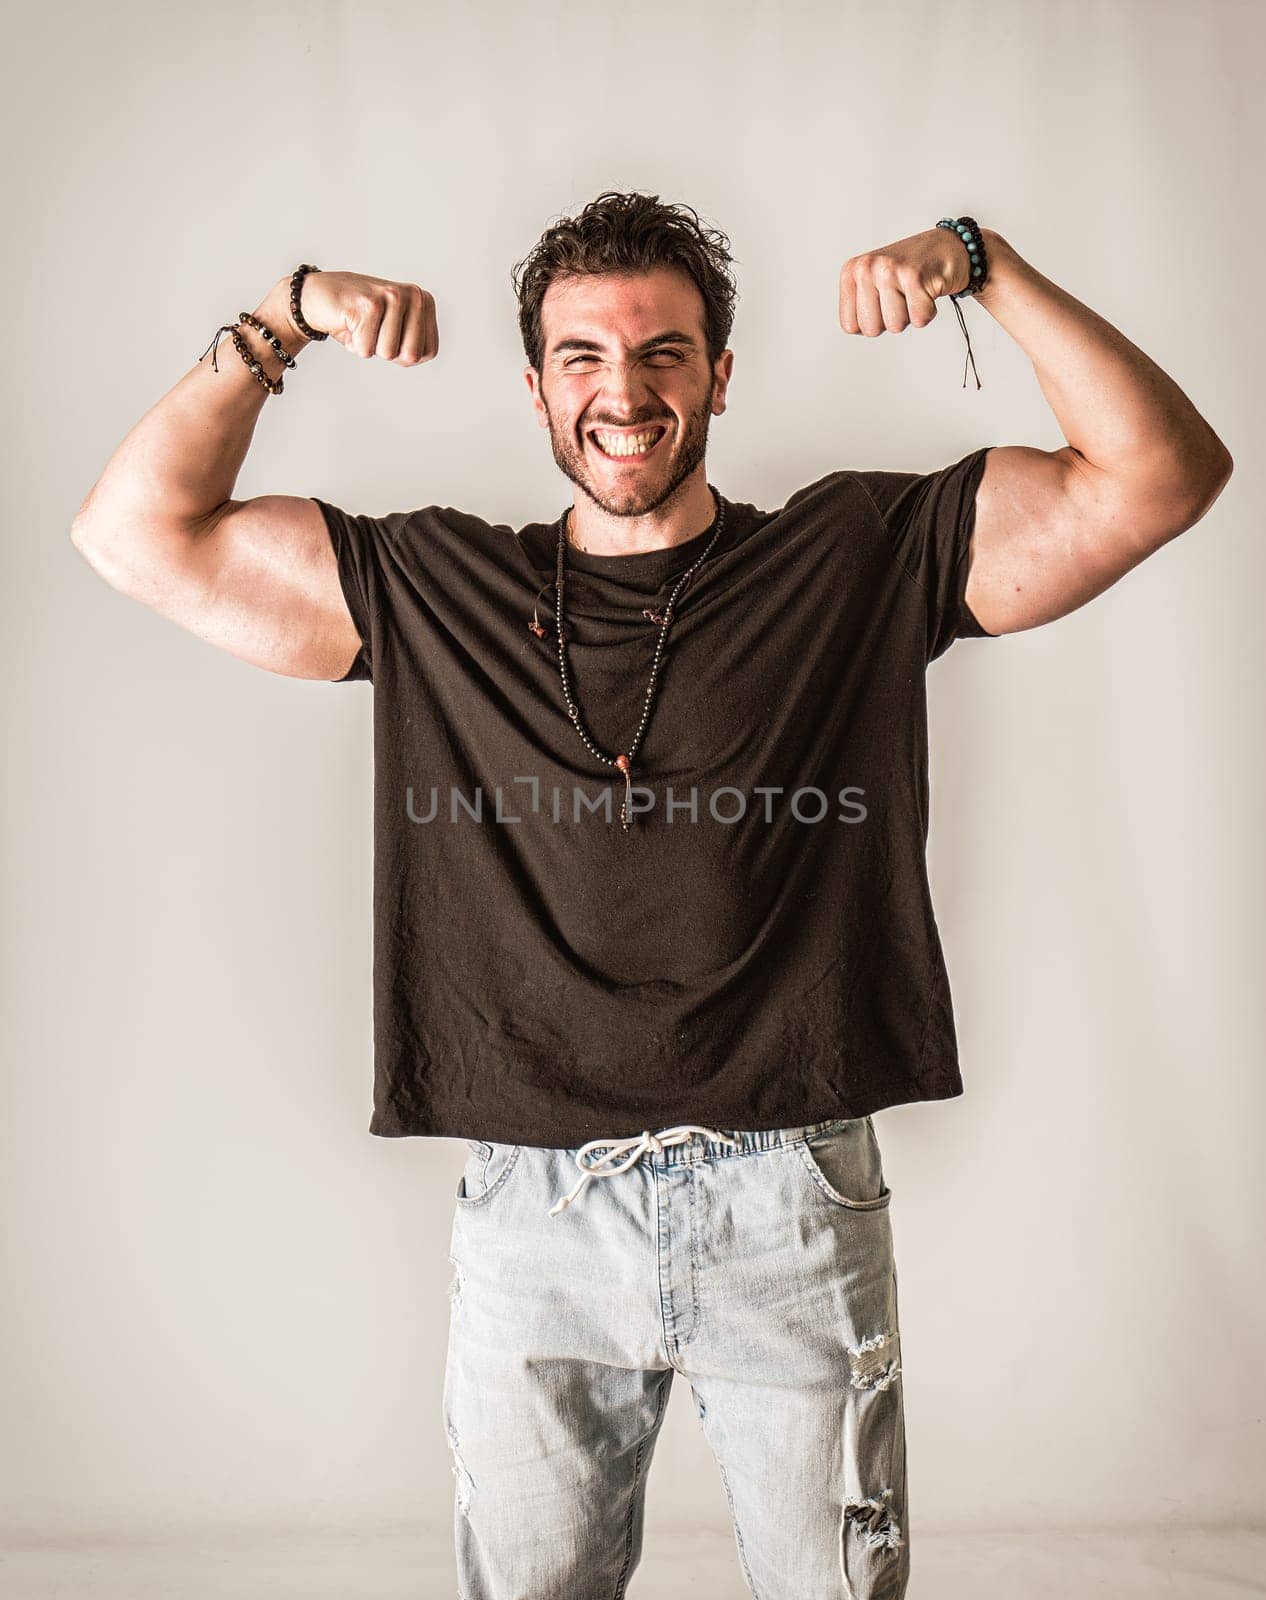 A Confident Man Doing a Double Biceps Pose by artofphoto